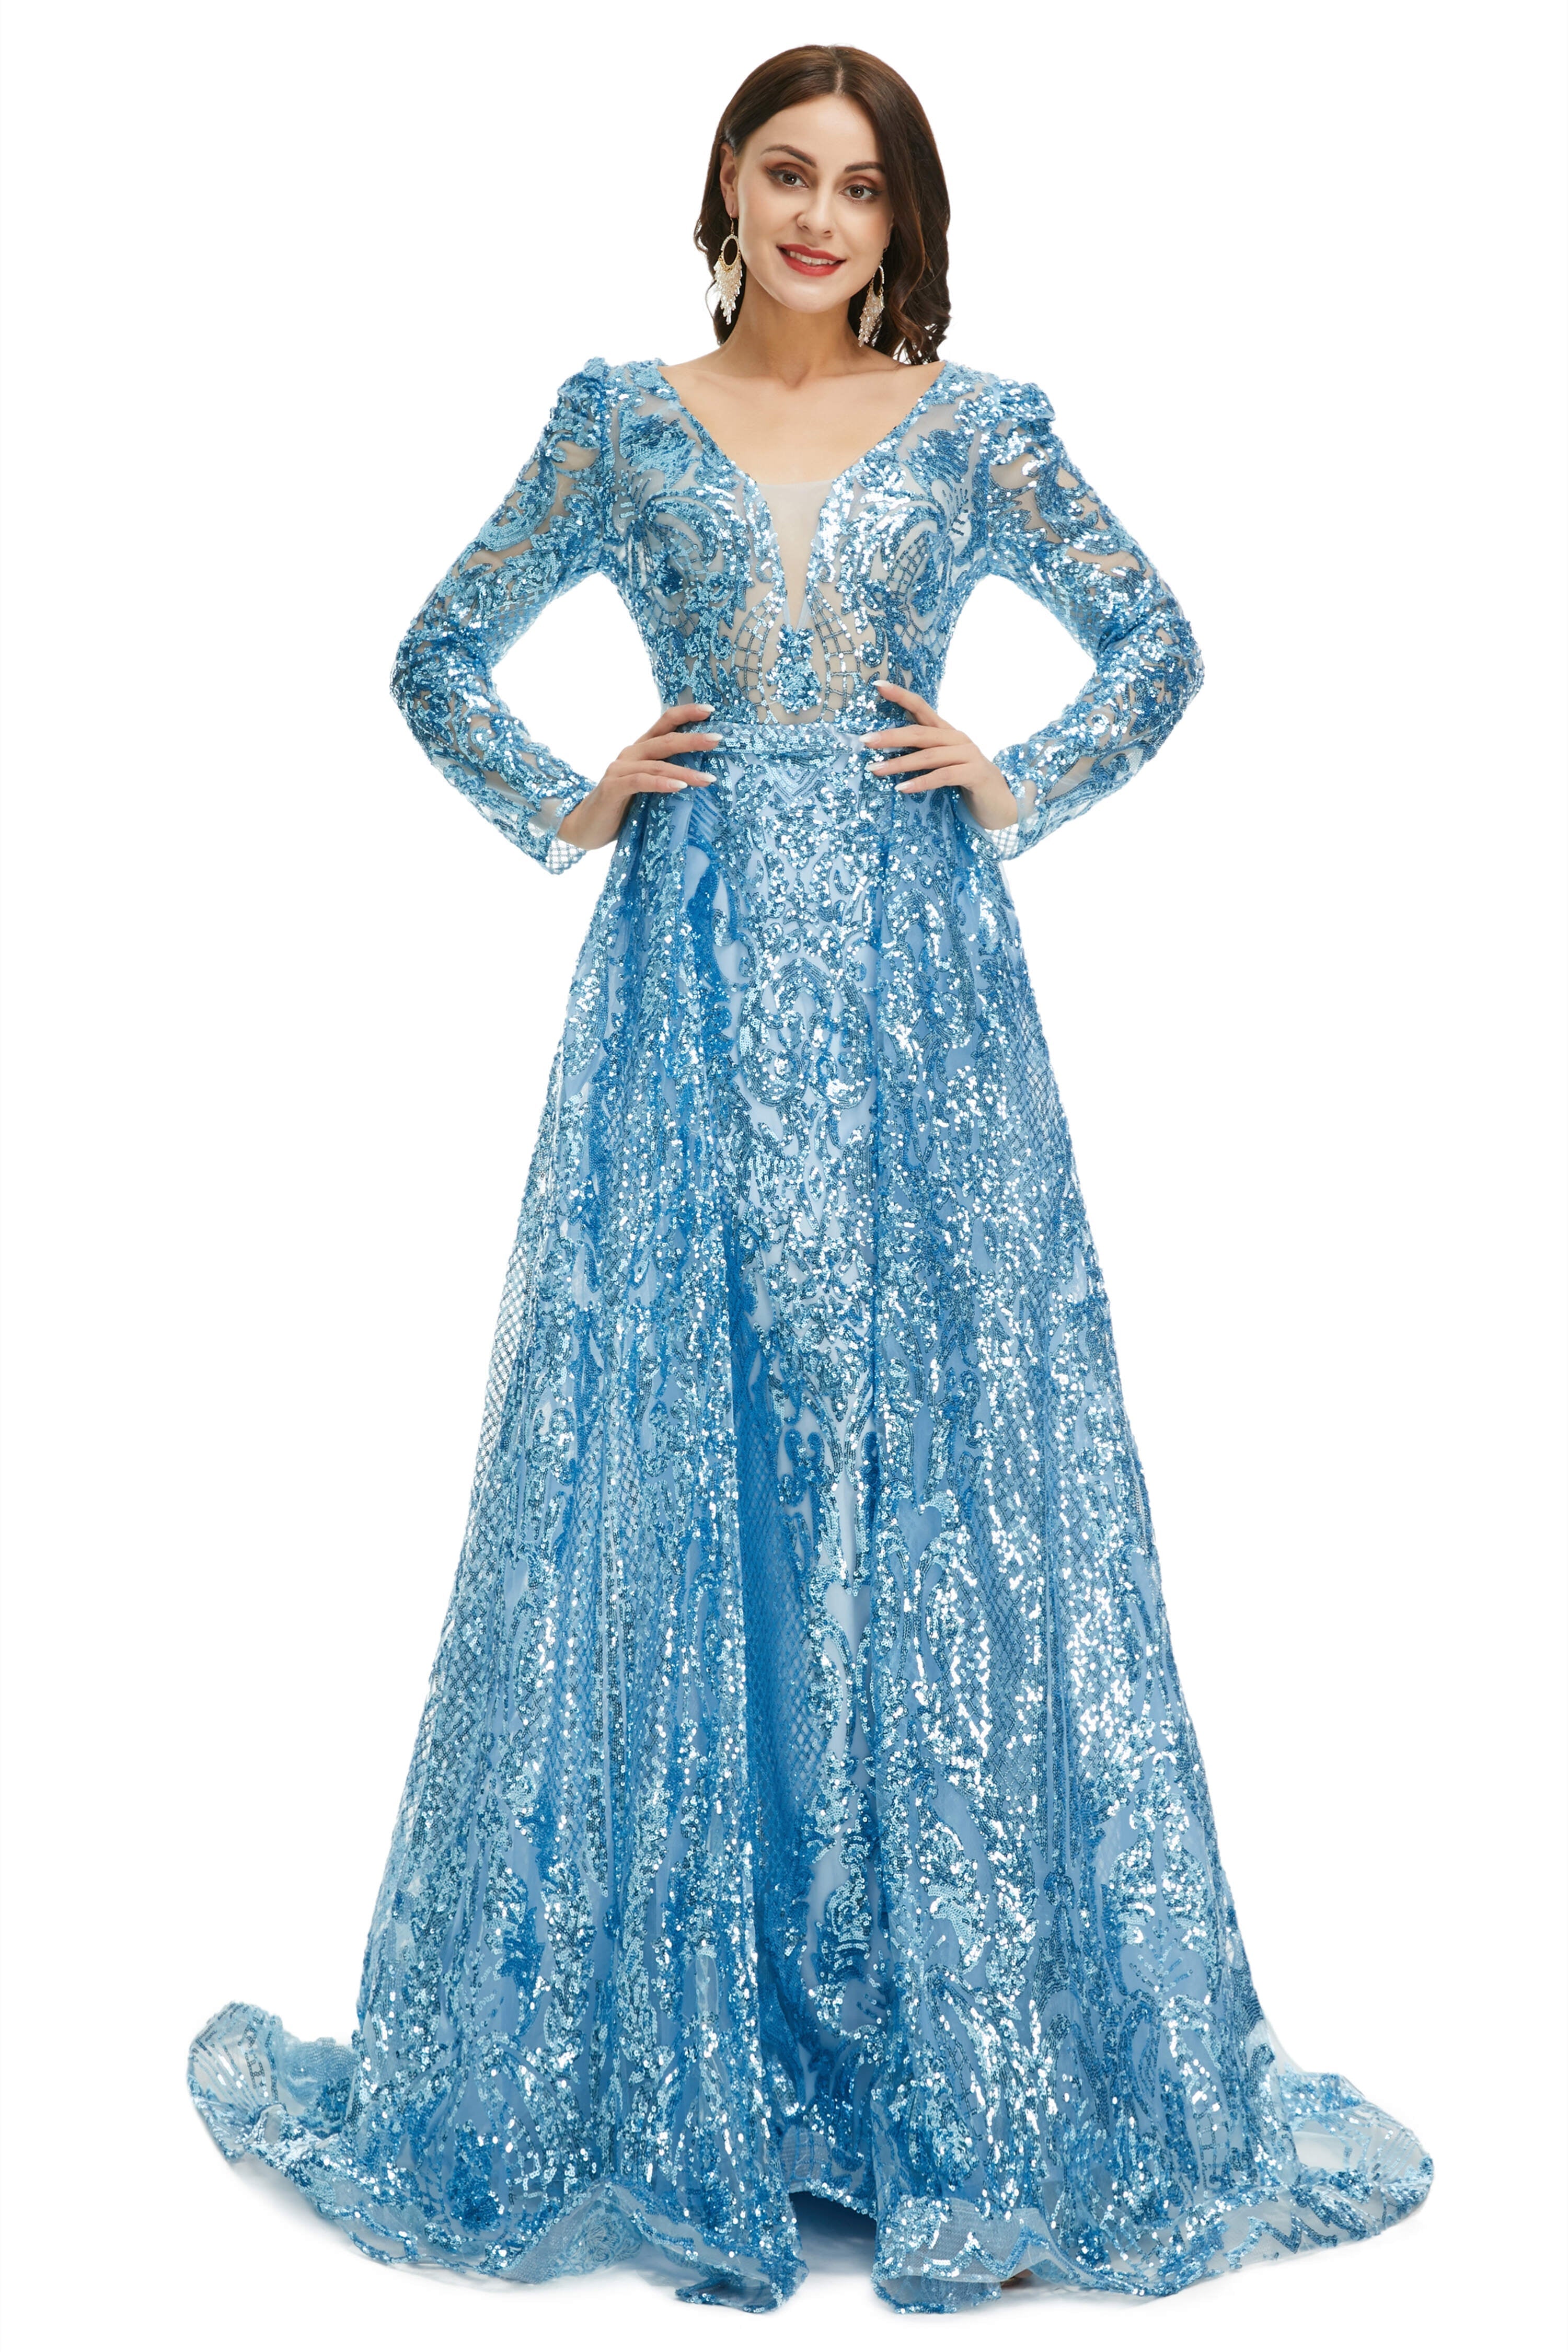 Homecoming Dress Shop, Blue Sequin With Detachable Train Long Sleeves Mermaid Evening Dresses